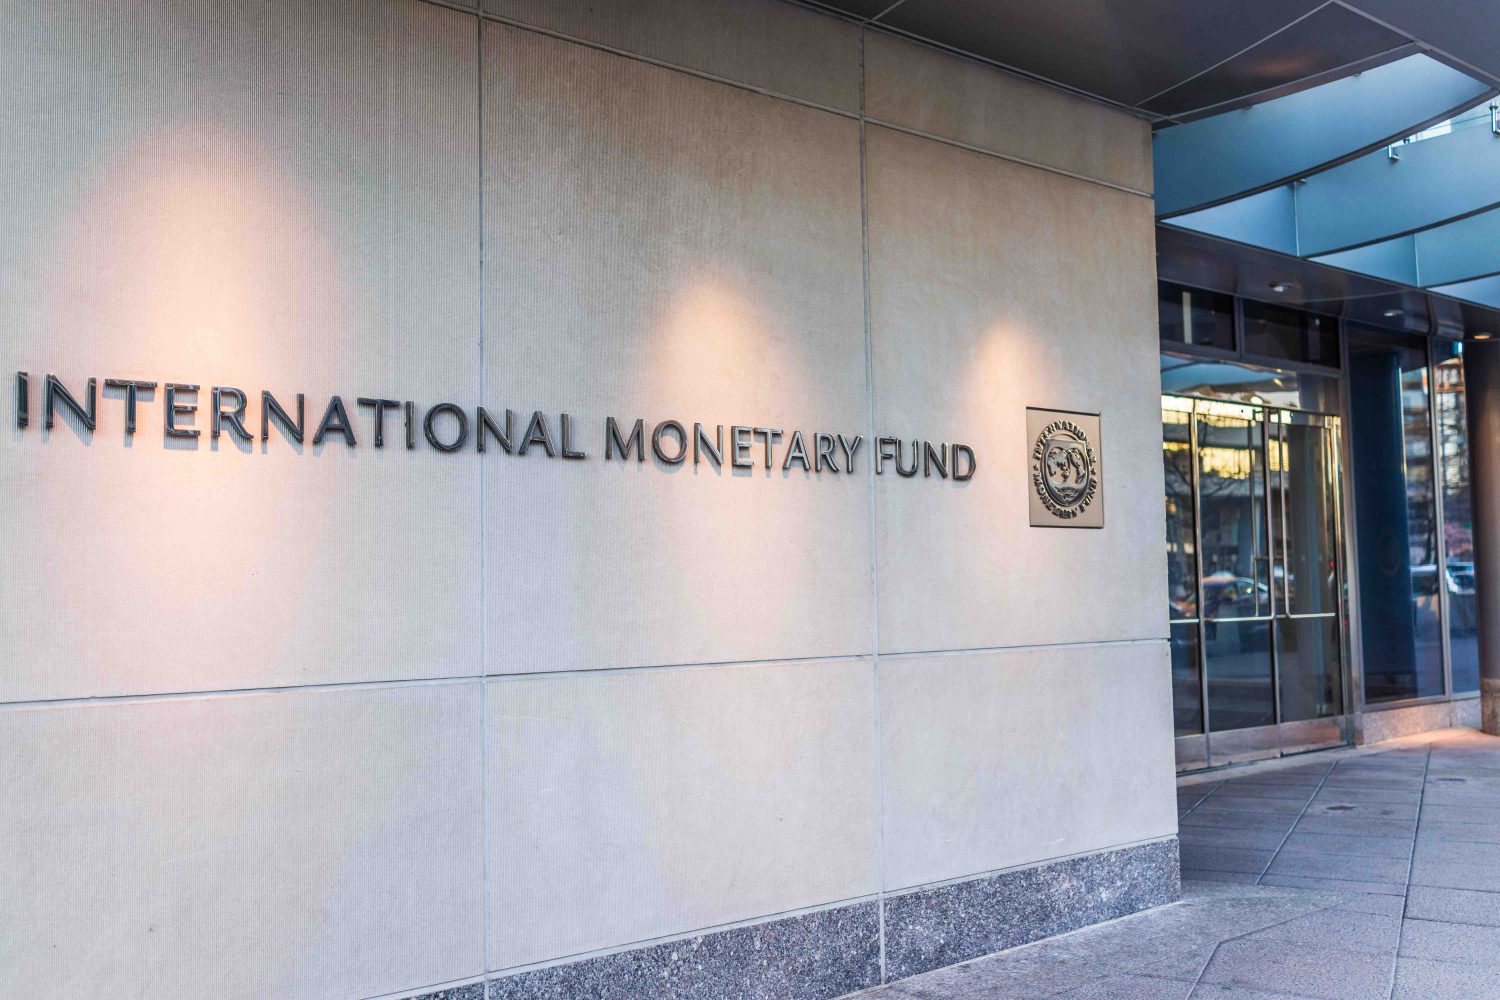 http://www.coindesk.com/imf-explores-icos-central-bank-coins-new-blockchain-note/